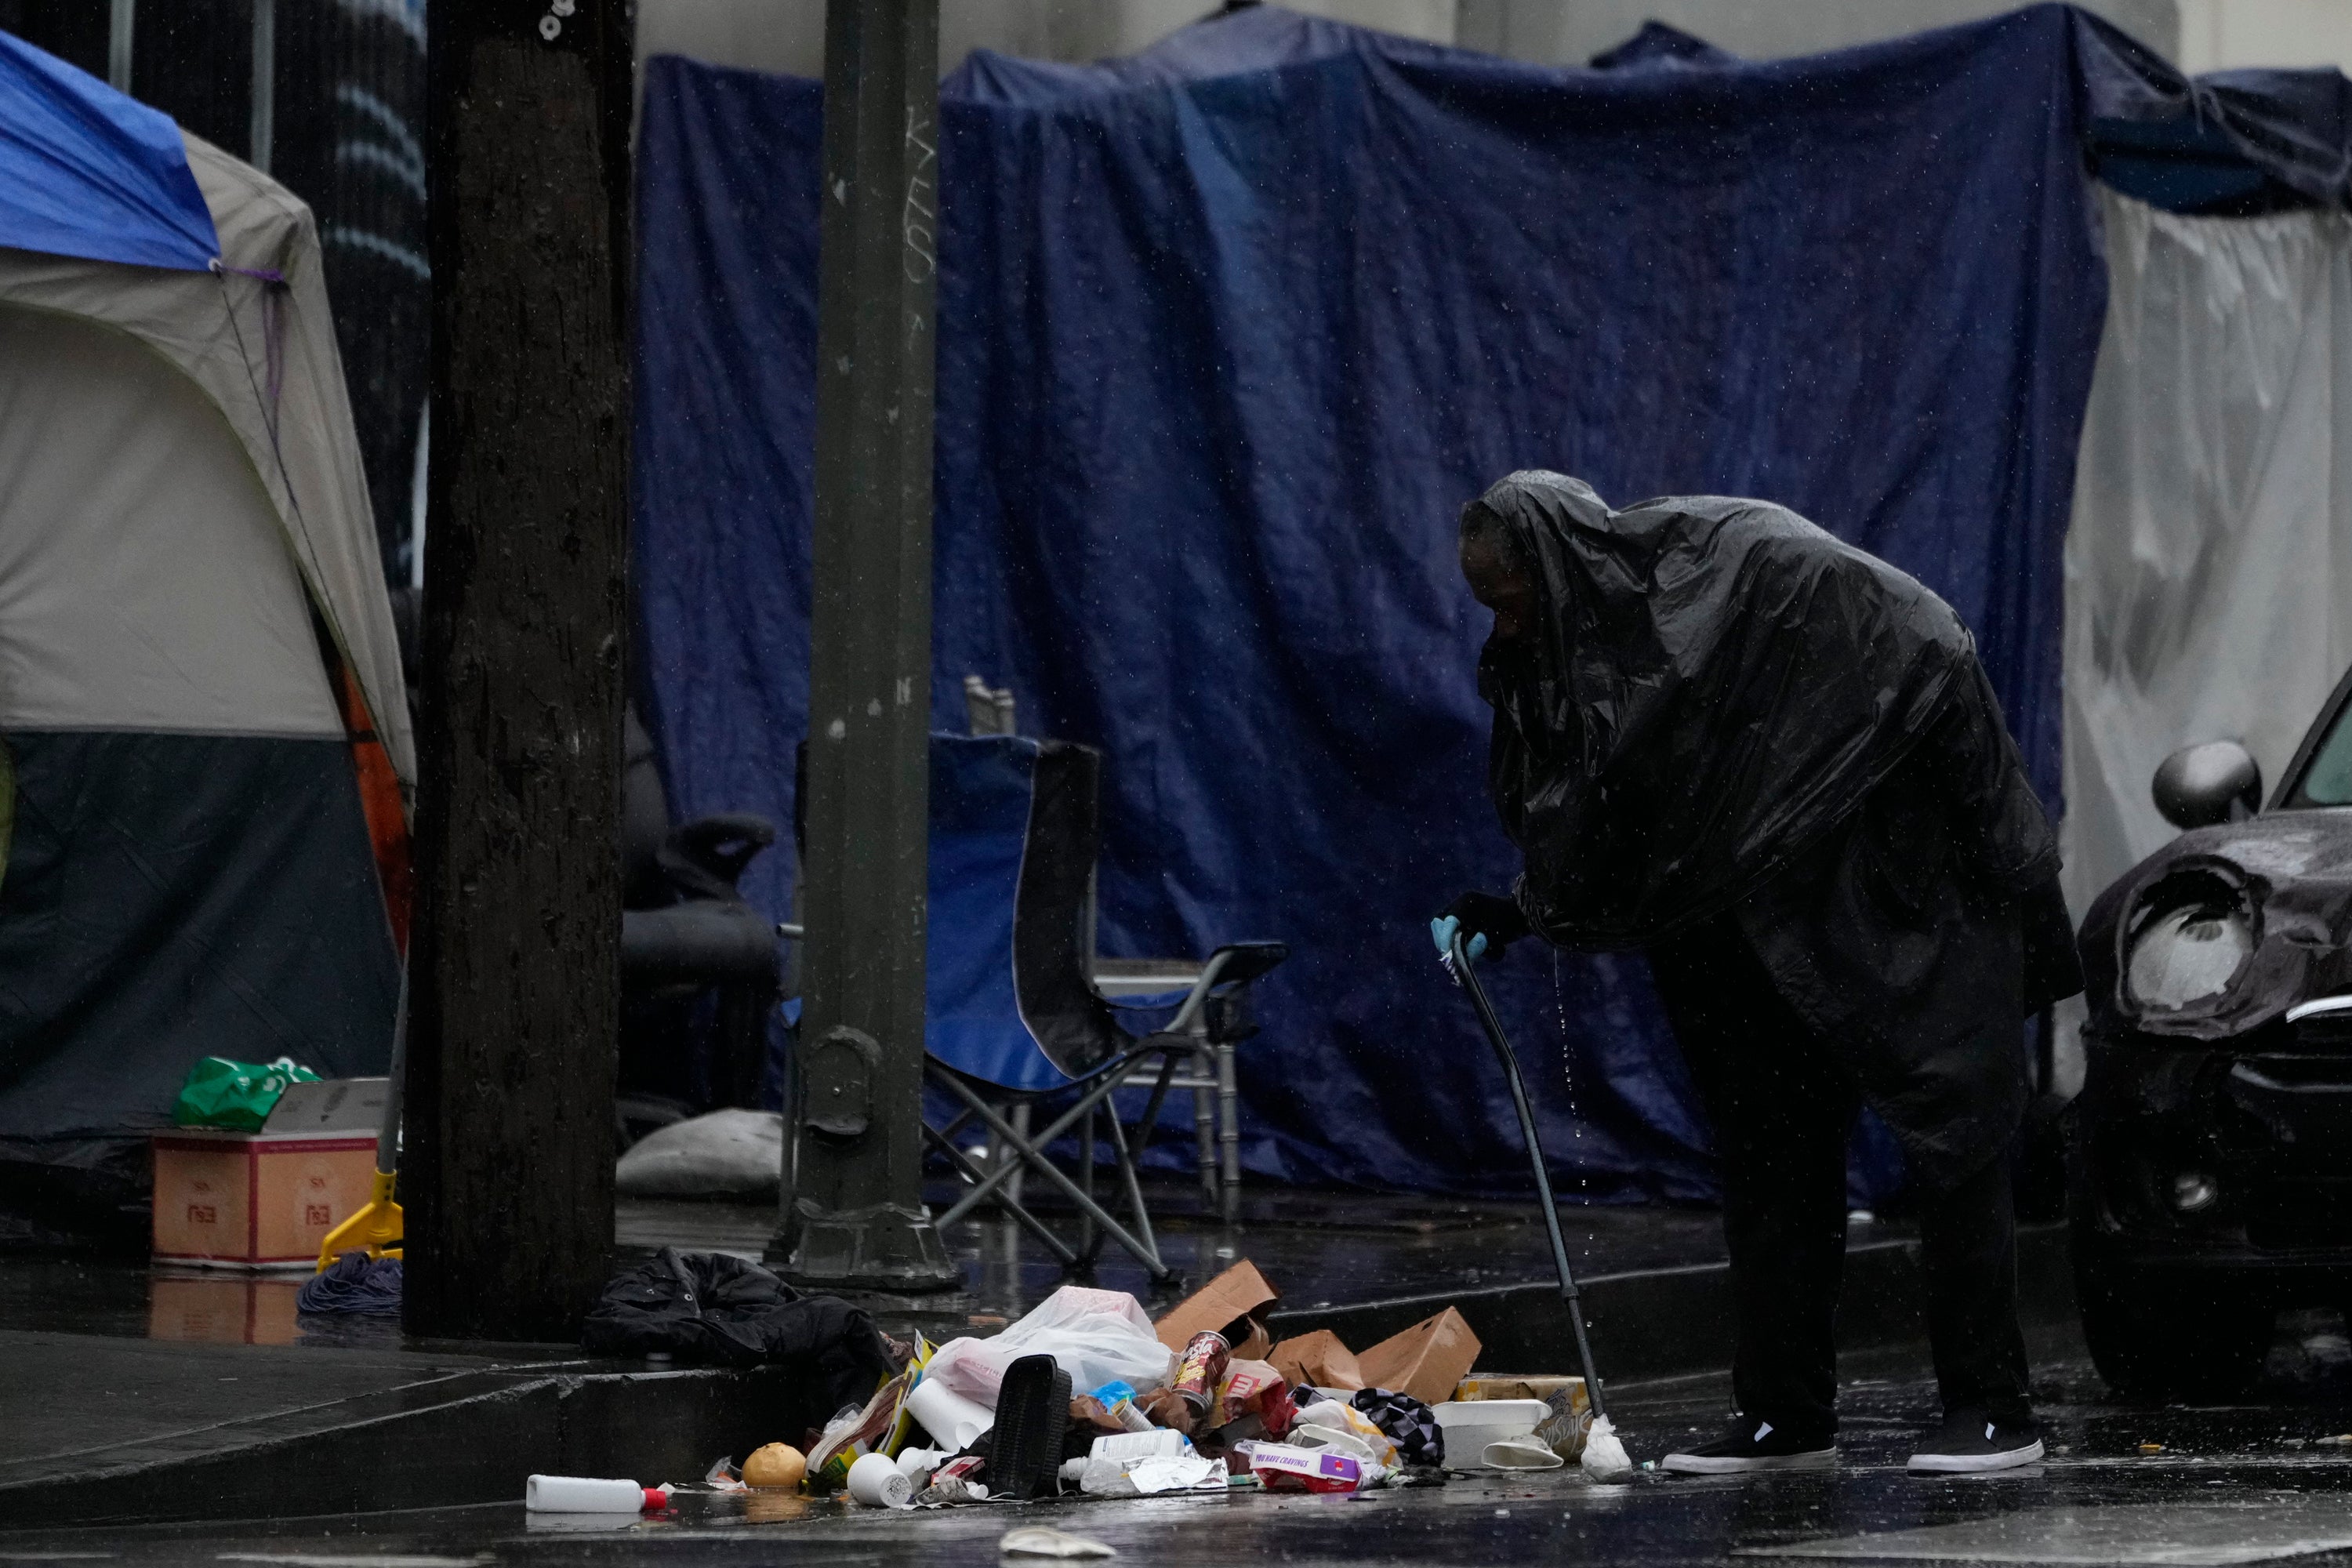 The severe California storms in previous days have hit LA’s unhoused population hardest